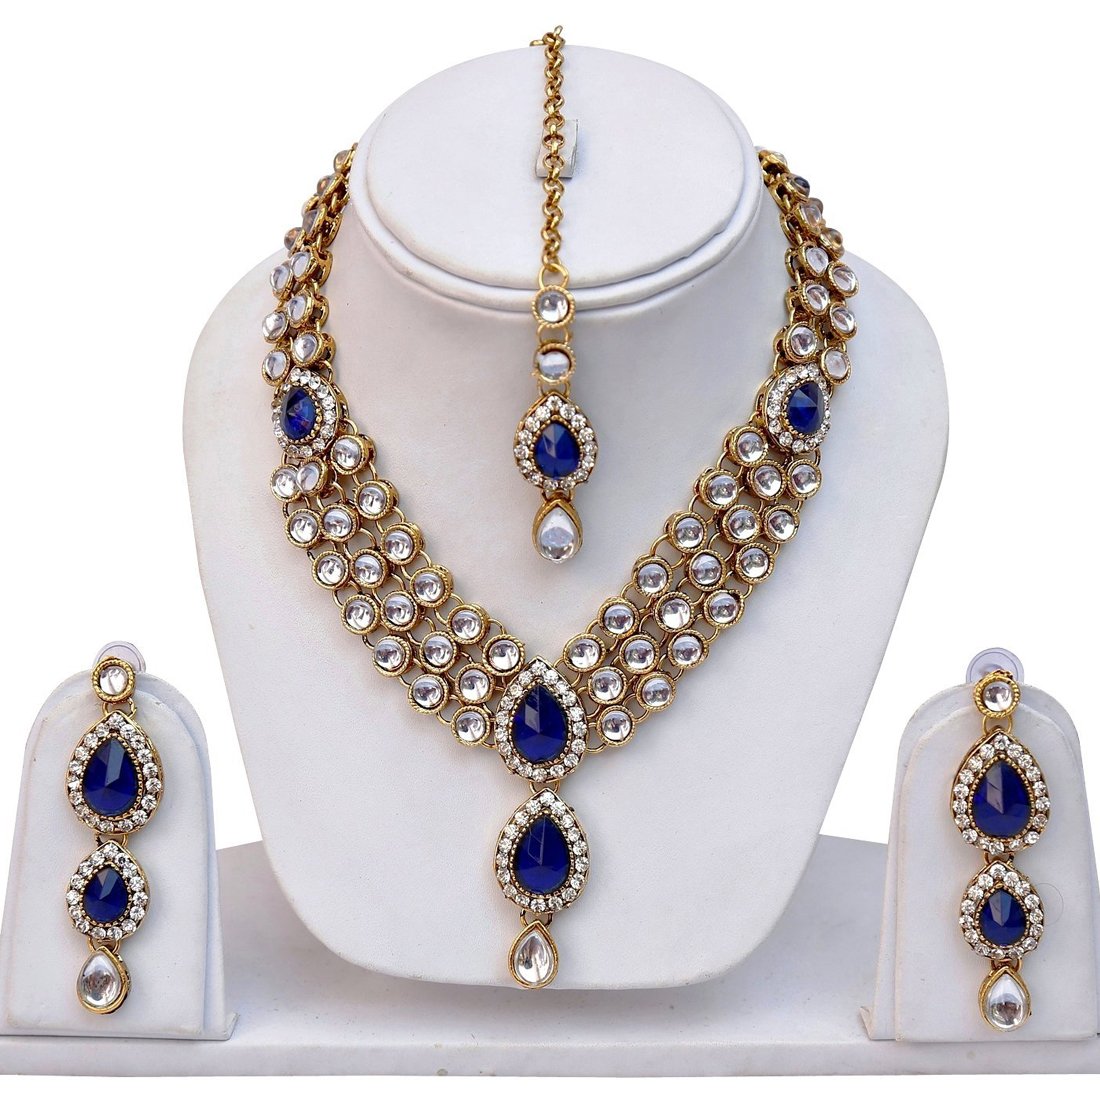 Shining Diva Kundan Traditional Necklace Jewellery Set with Earrings for Women  (Blue) (8408s)